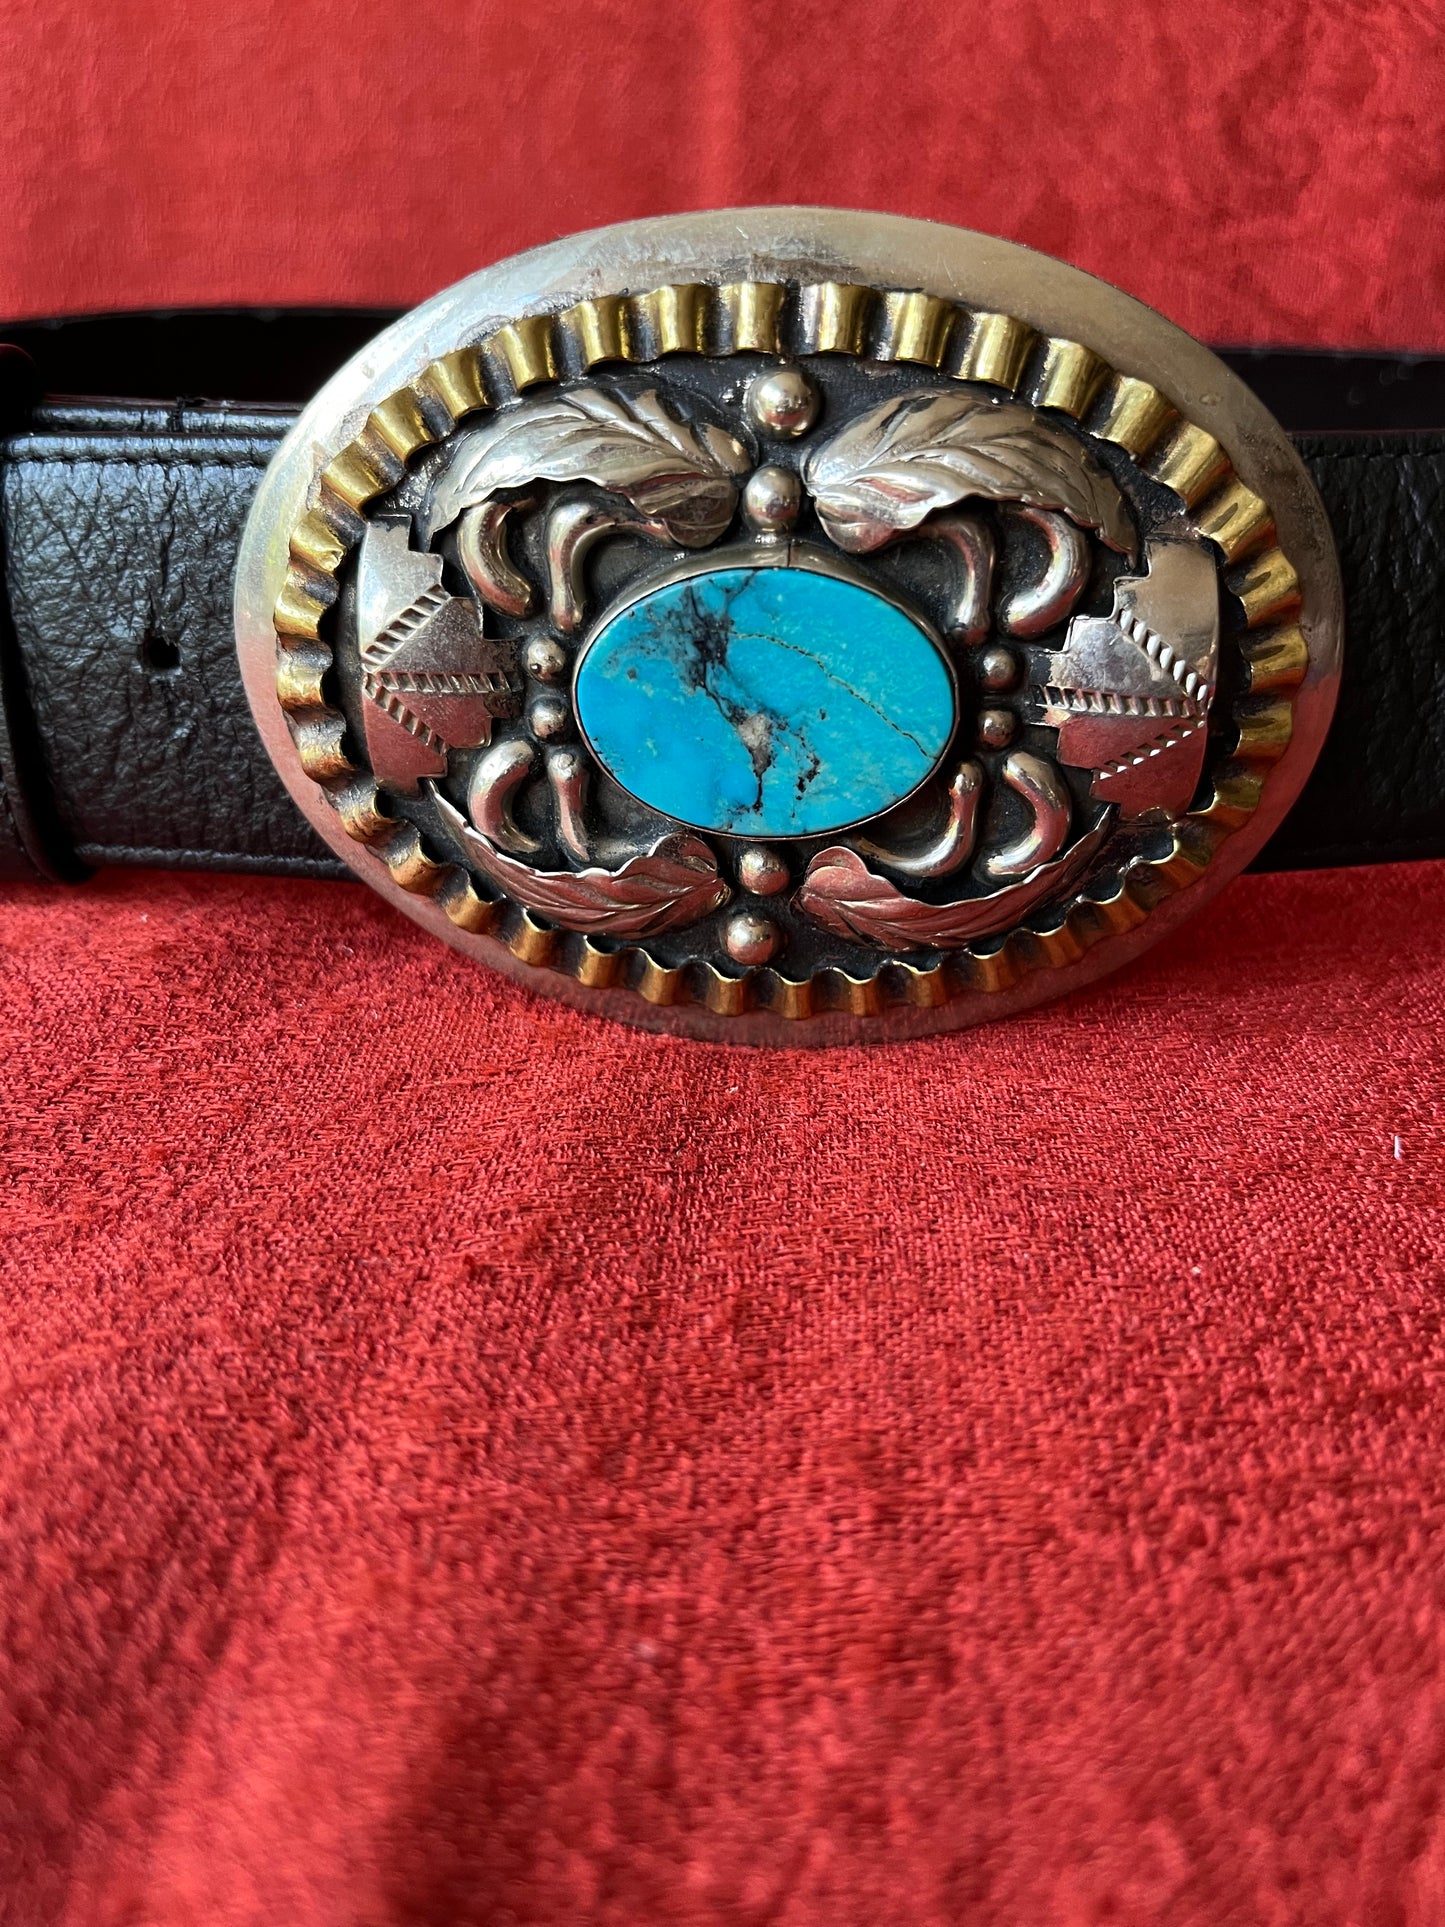 Vintage Alpaca Silver and Turquoise Buckled Leather Belt